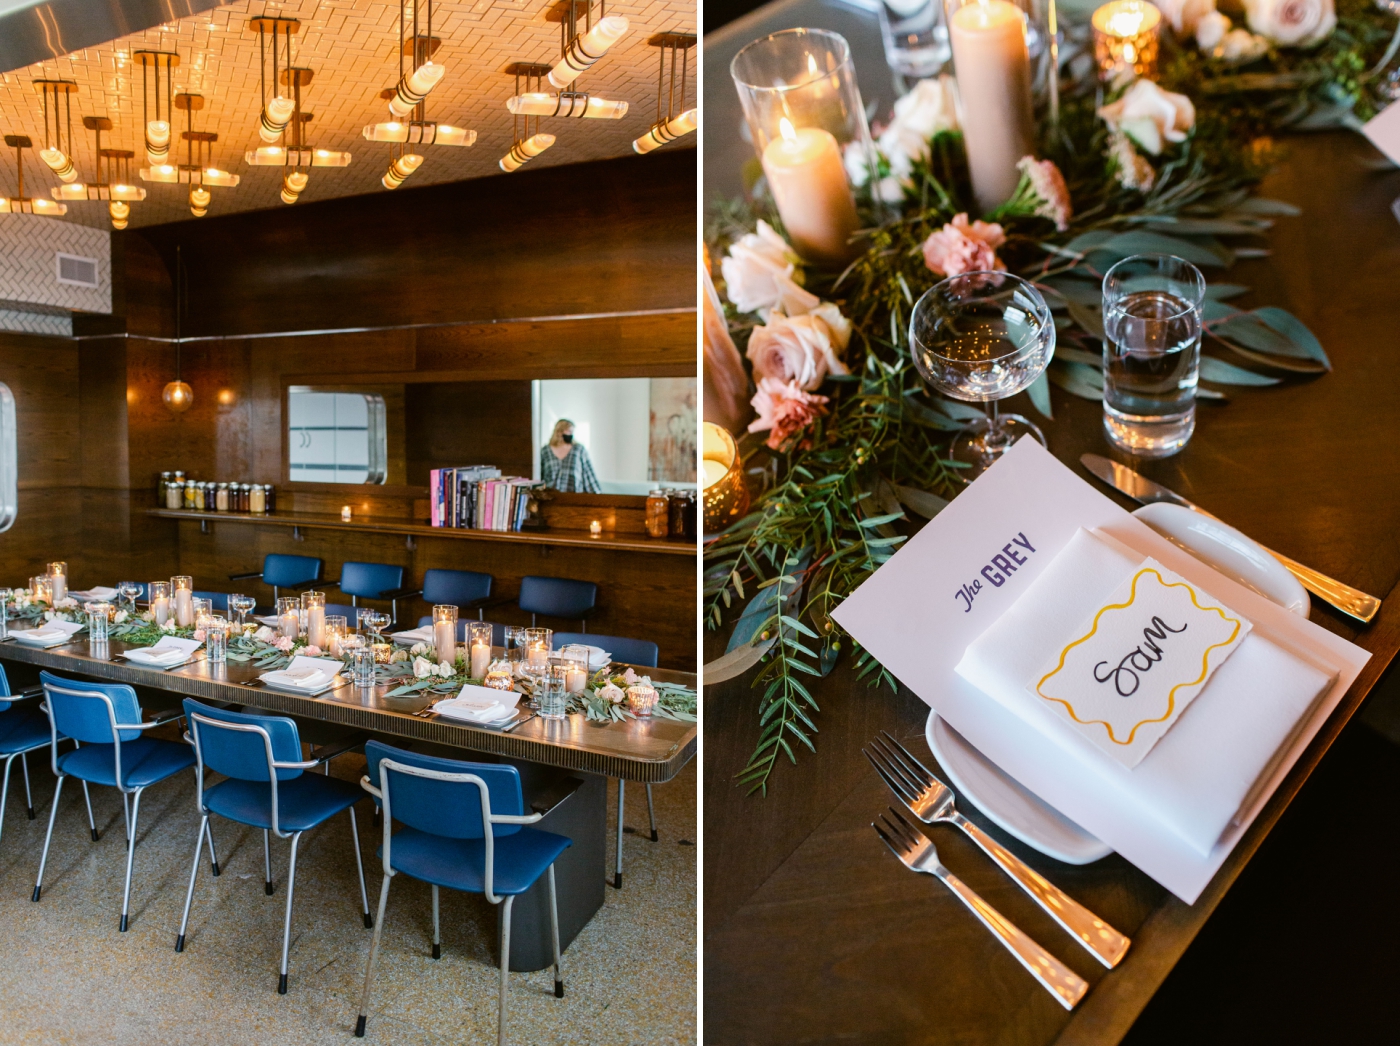 Intimate elopement dinner at The Grey in Savannah